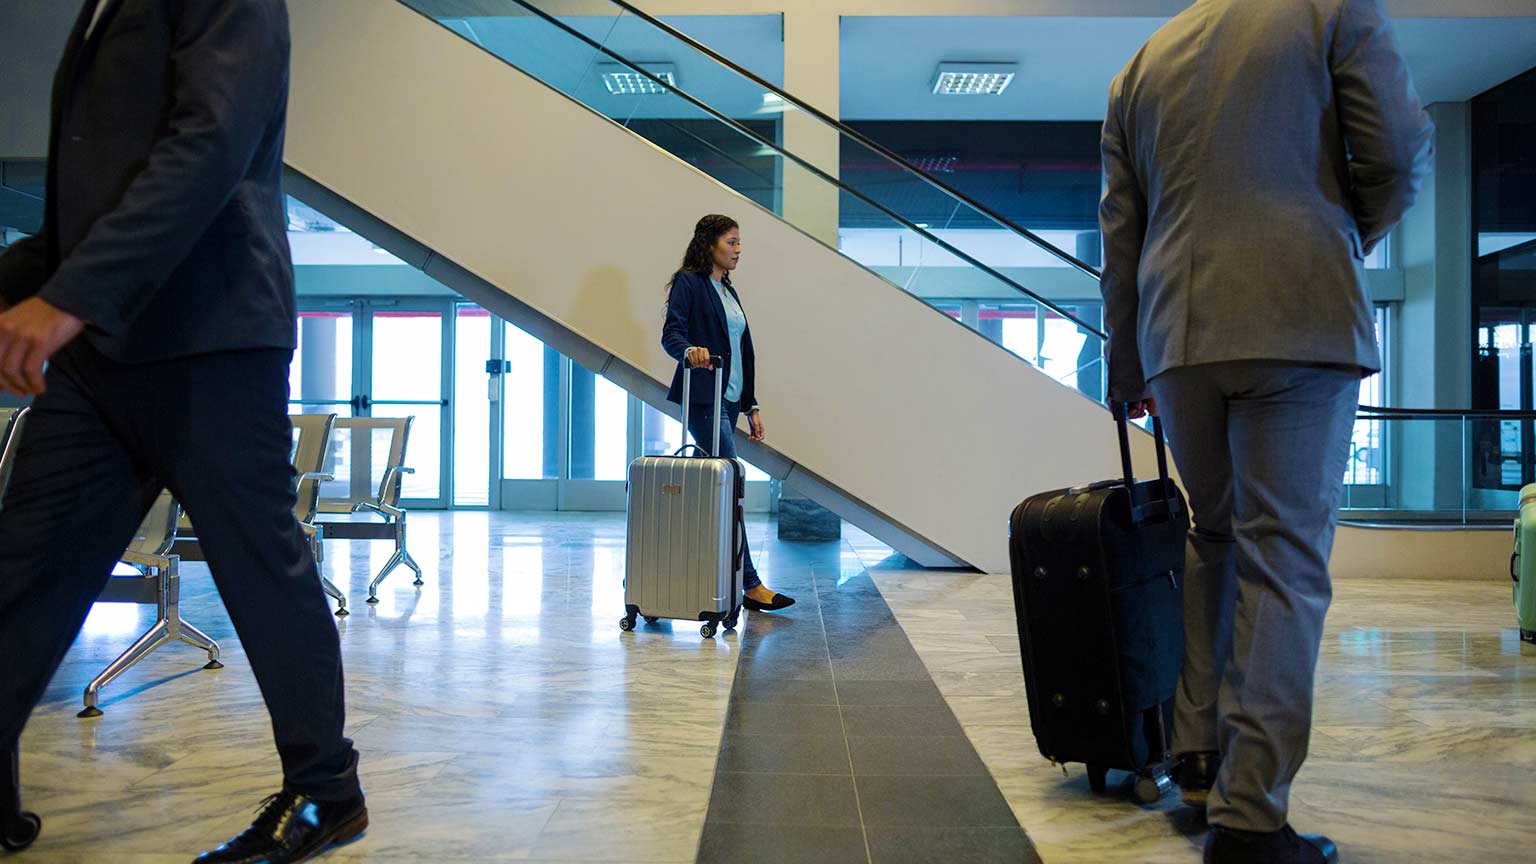 Expectations of Business Travellers from their Hotel Stay